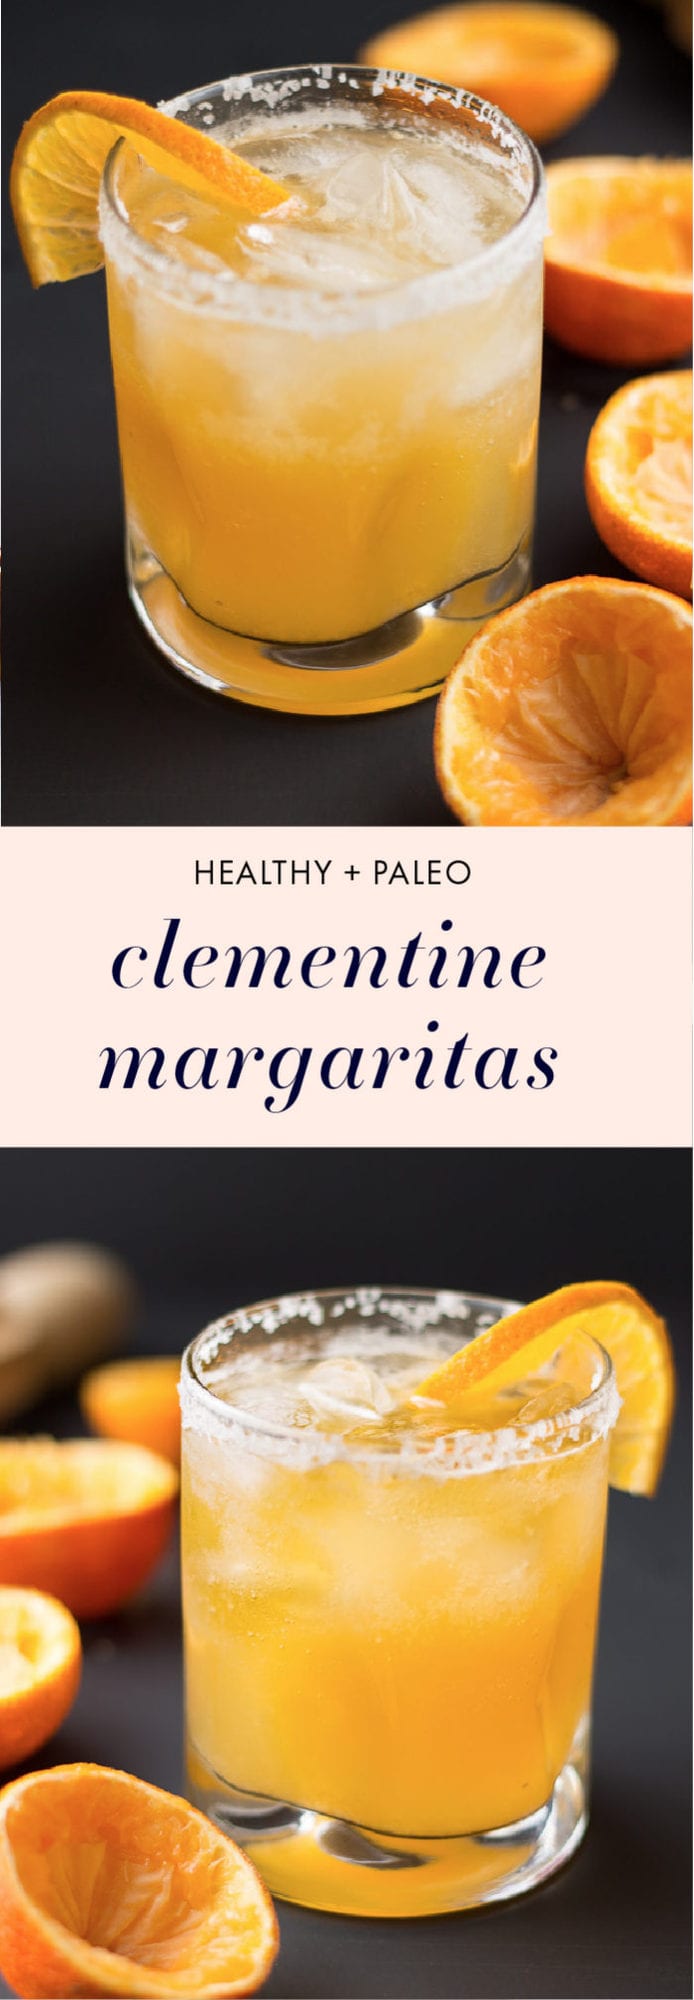 These clementine healthy margaritas are a fantastic way to use up the abundance of citrus. Depending on the sweetness of your clementines, you might not need any sweetener at all - the perfect healthy margaritas recipe for Cinco de Mayo or any fiesta occasion!